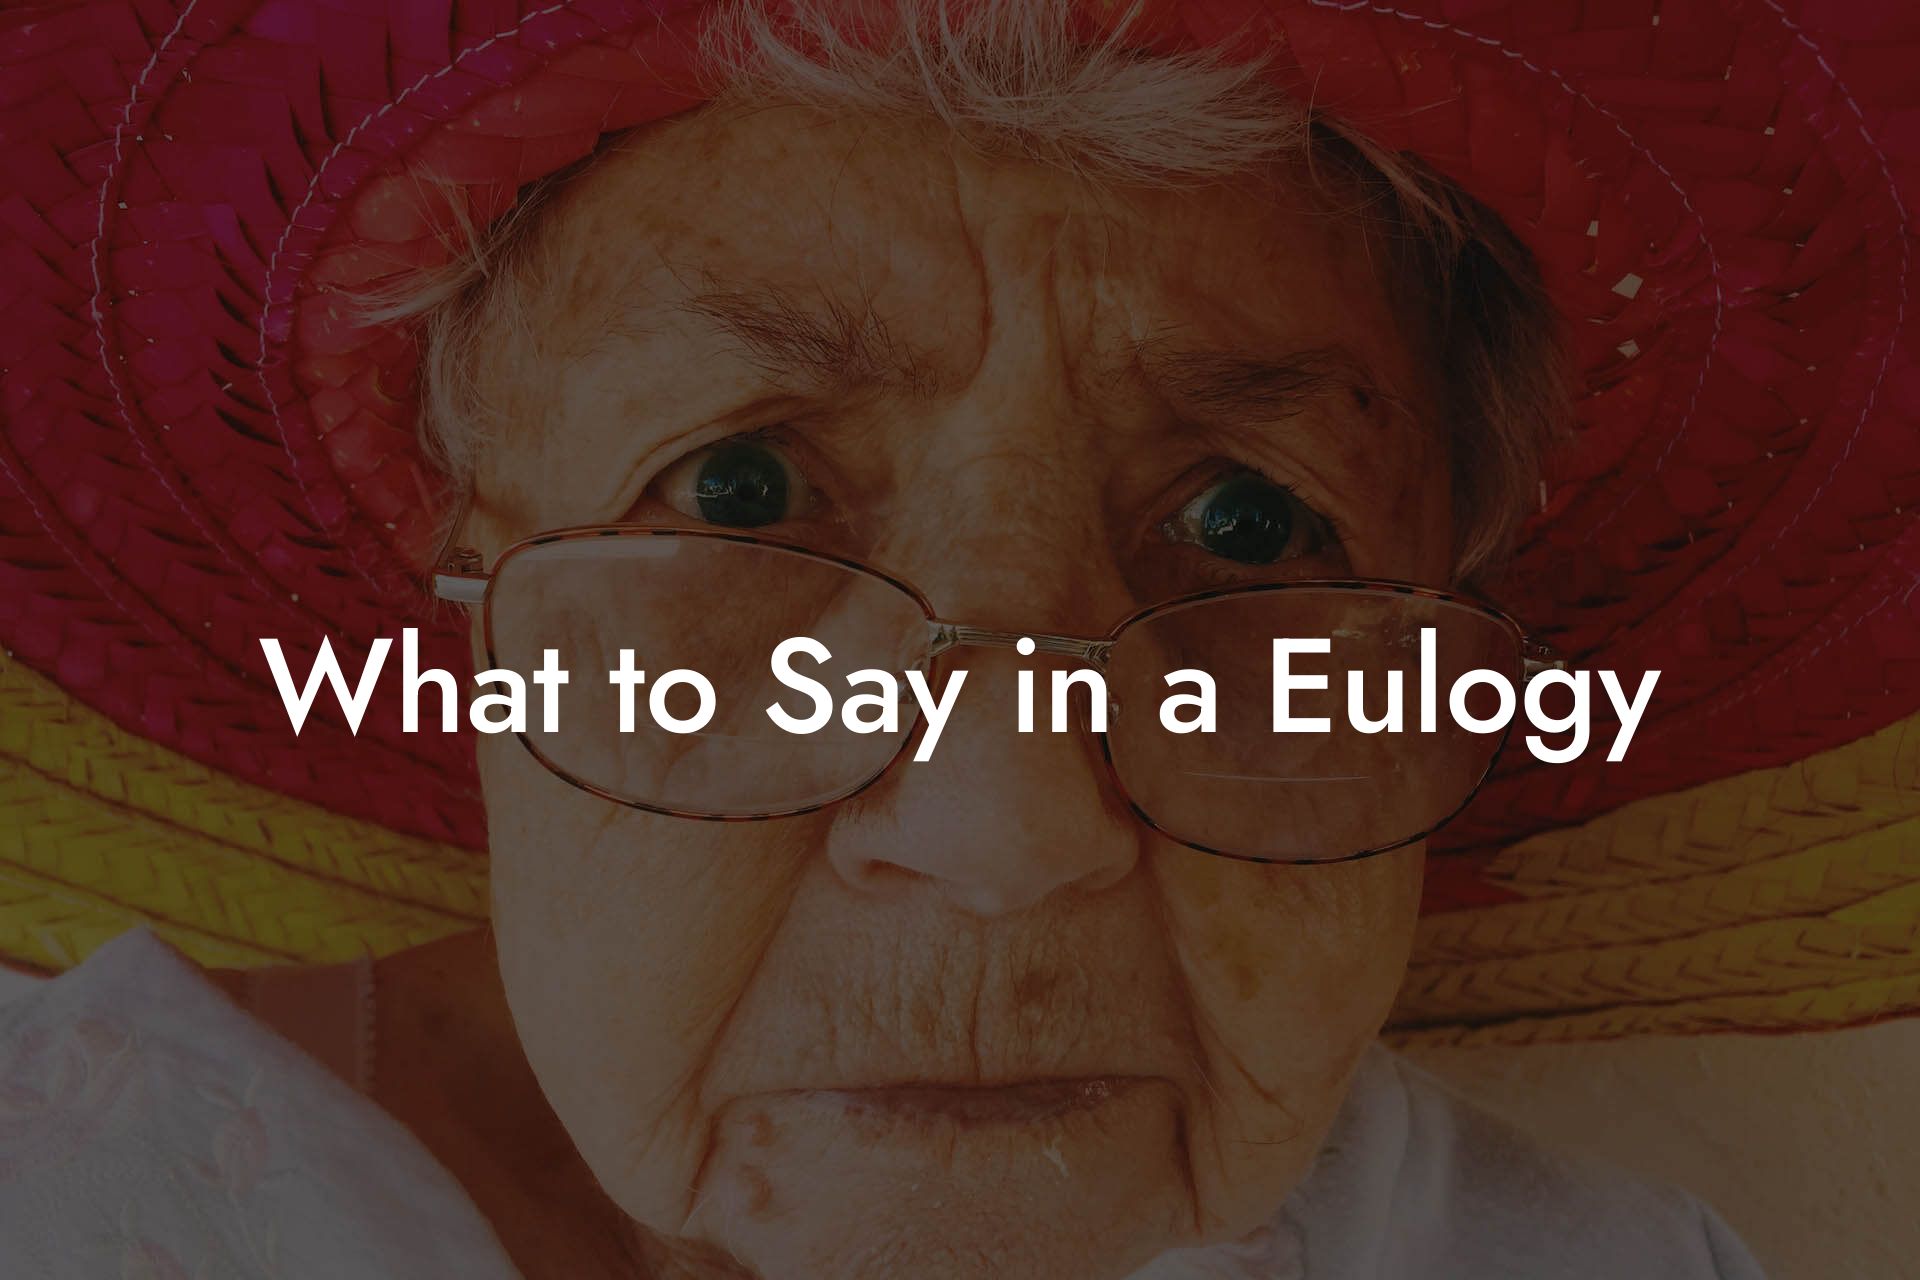 What to Say in a Eulogy